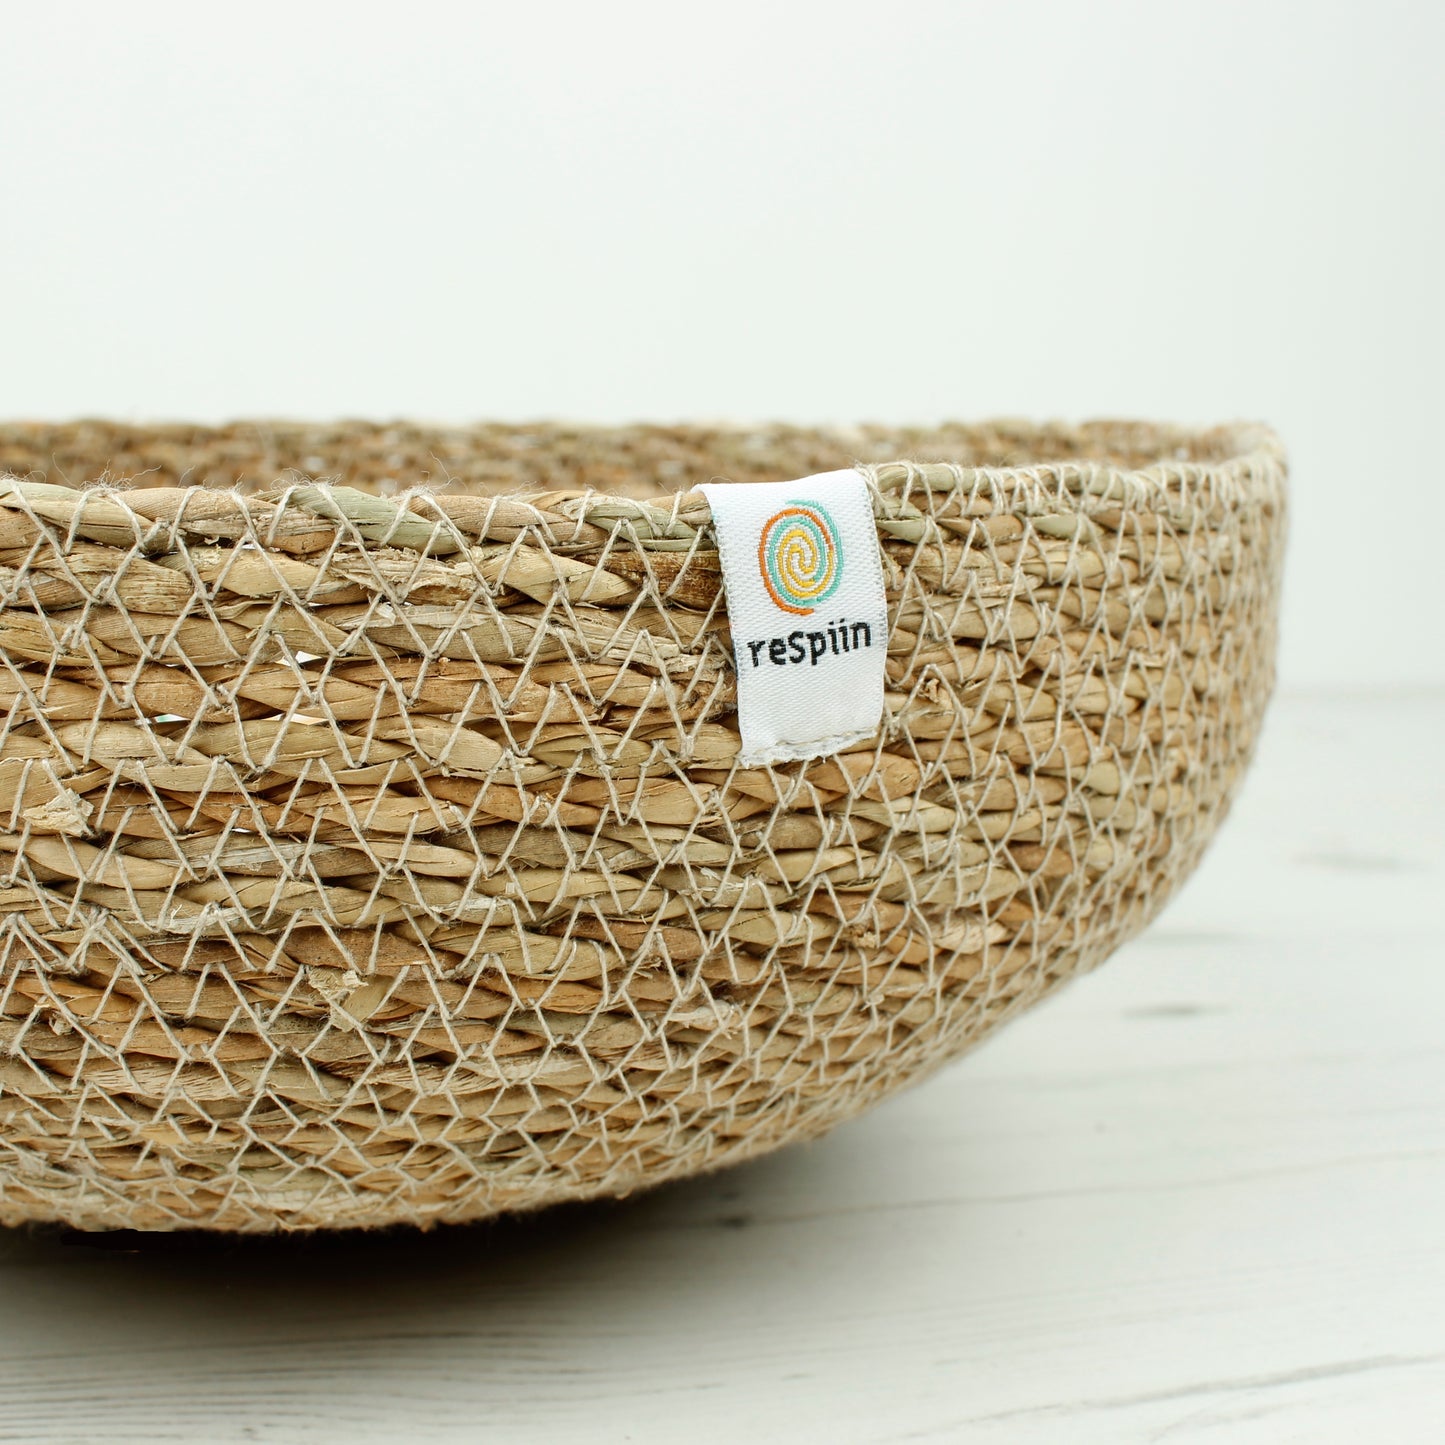 LARGE Woven Seagrass Bowl - NATURAL